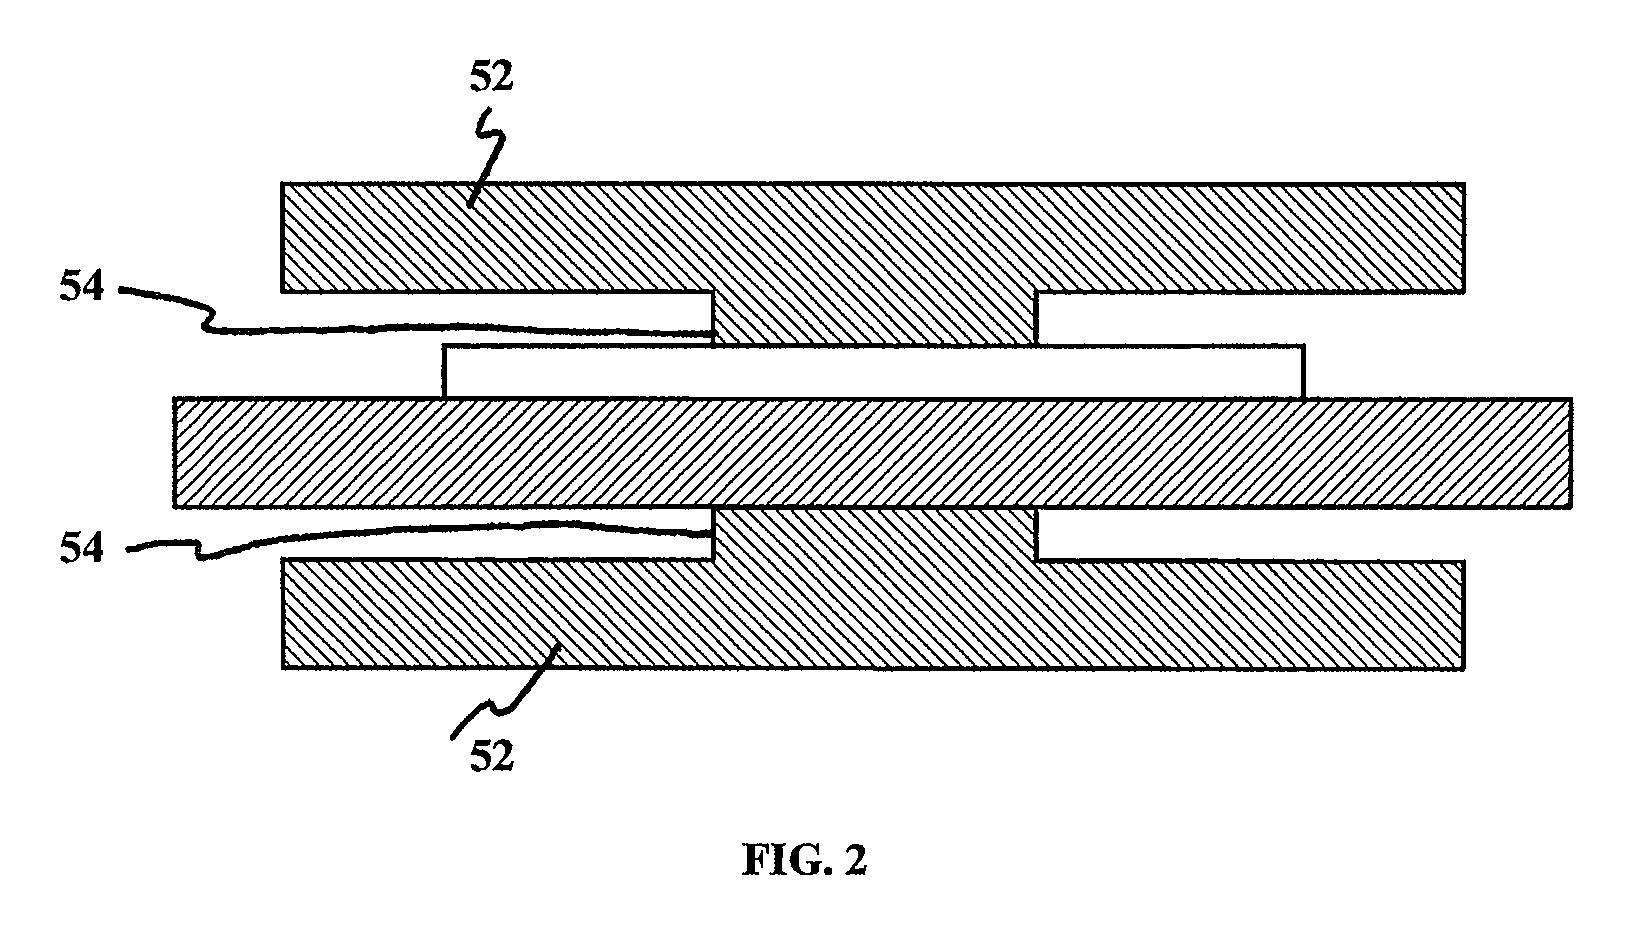 Non-resonant energy harvesting devices and methods